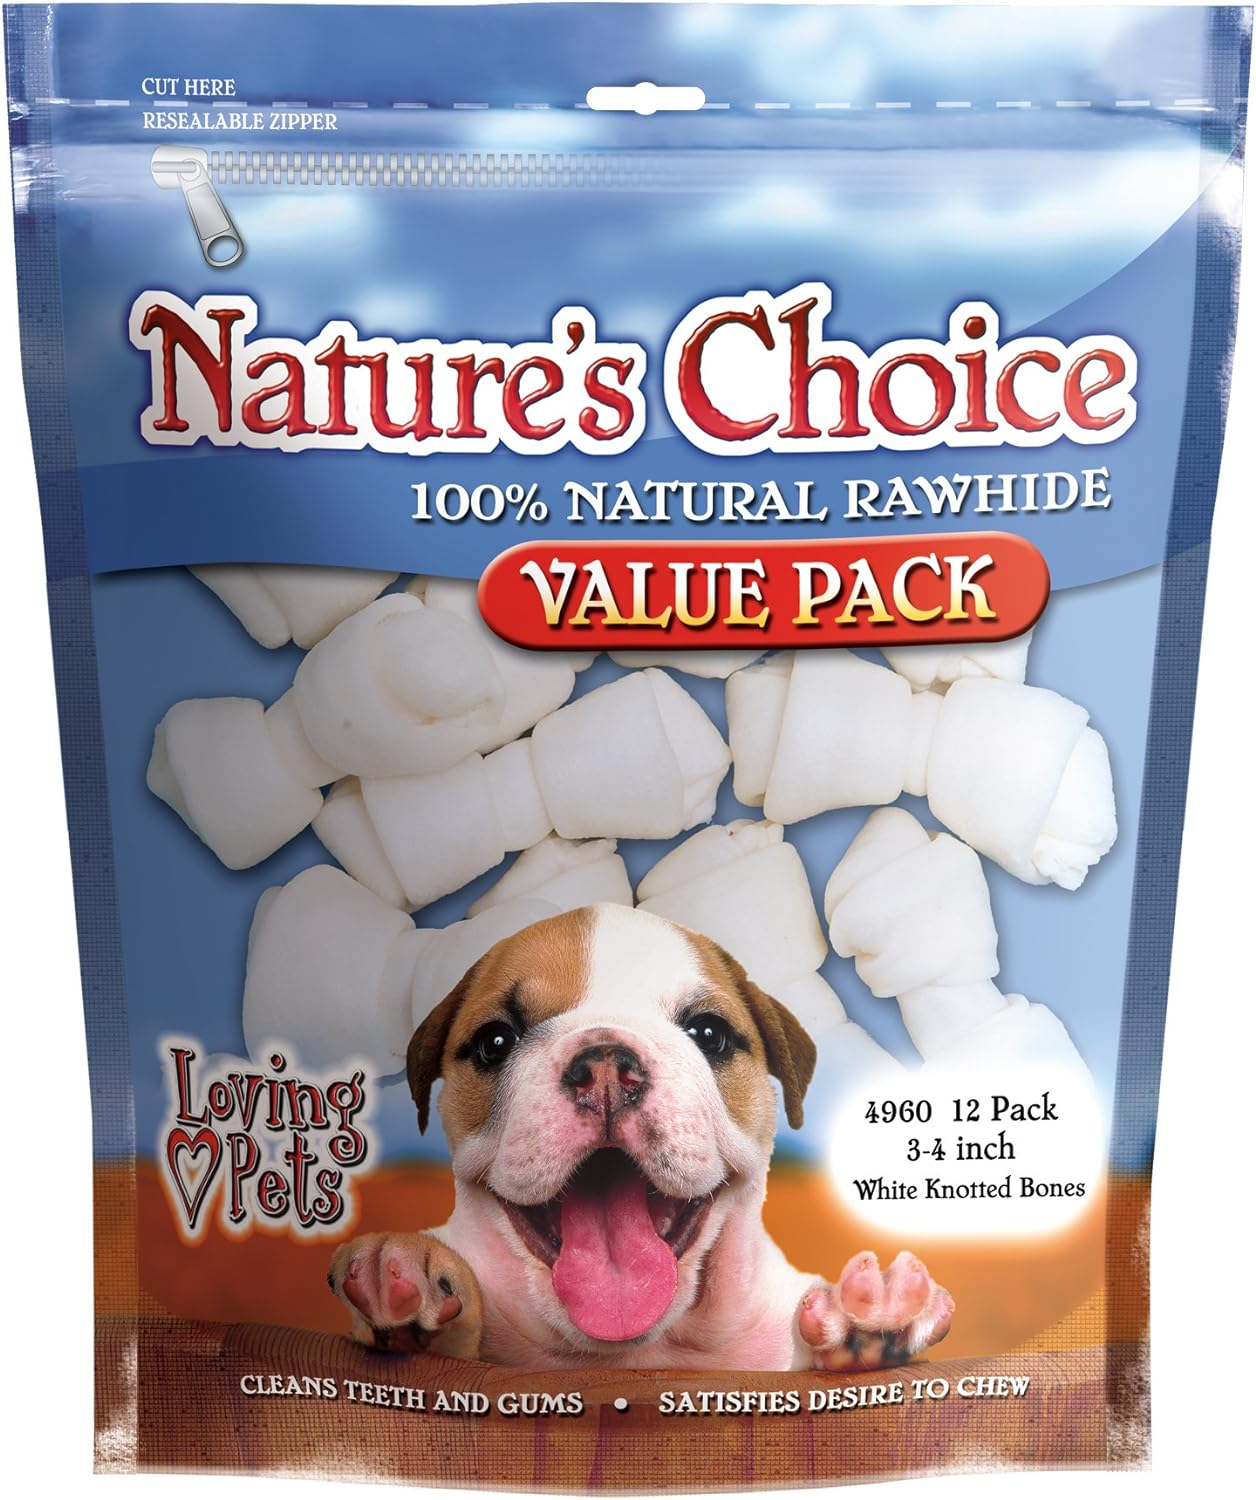 Loving Pets Nature's Choice - White Knotted Rawhide Bones for Dogs, 12 Pack of 3-4" Bones (for dogs less than 10 lbs)